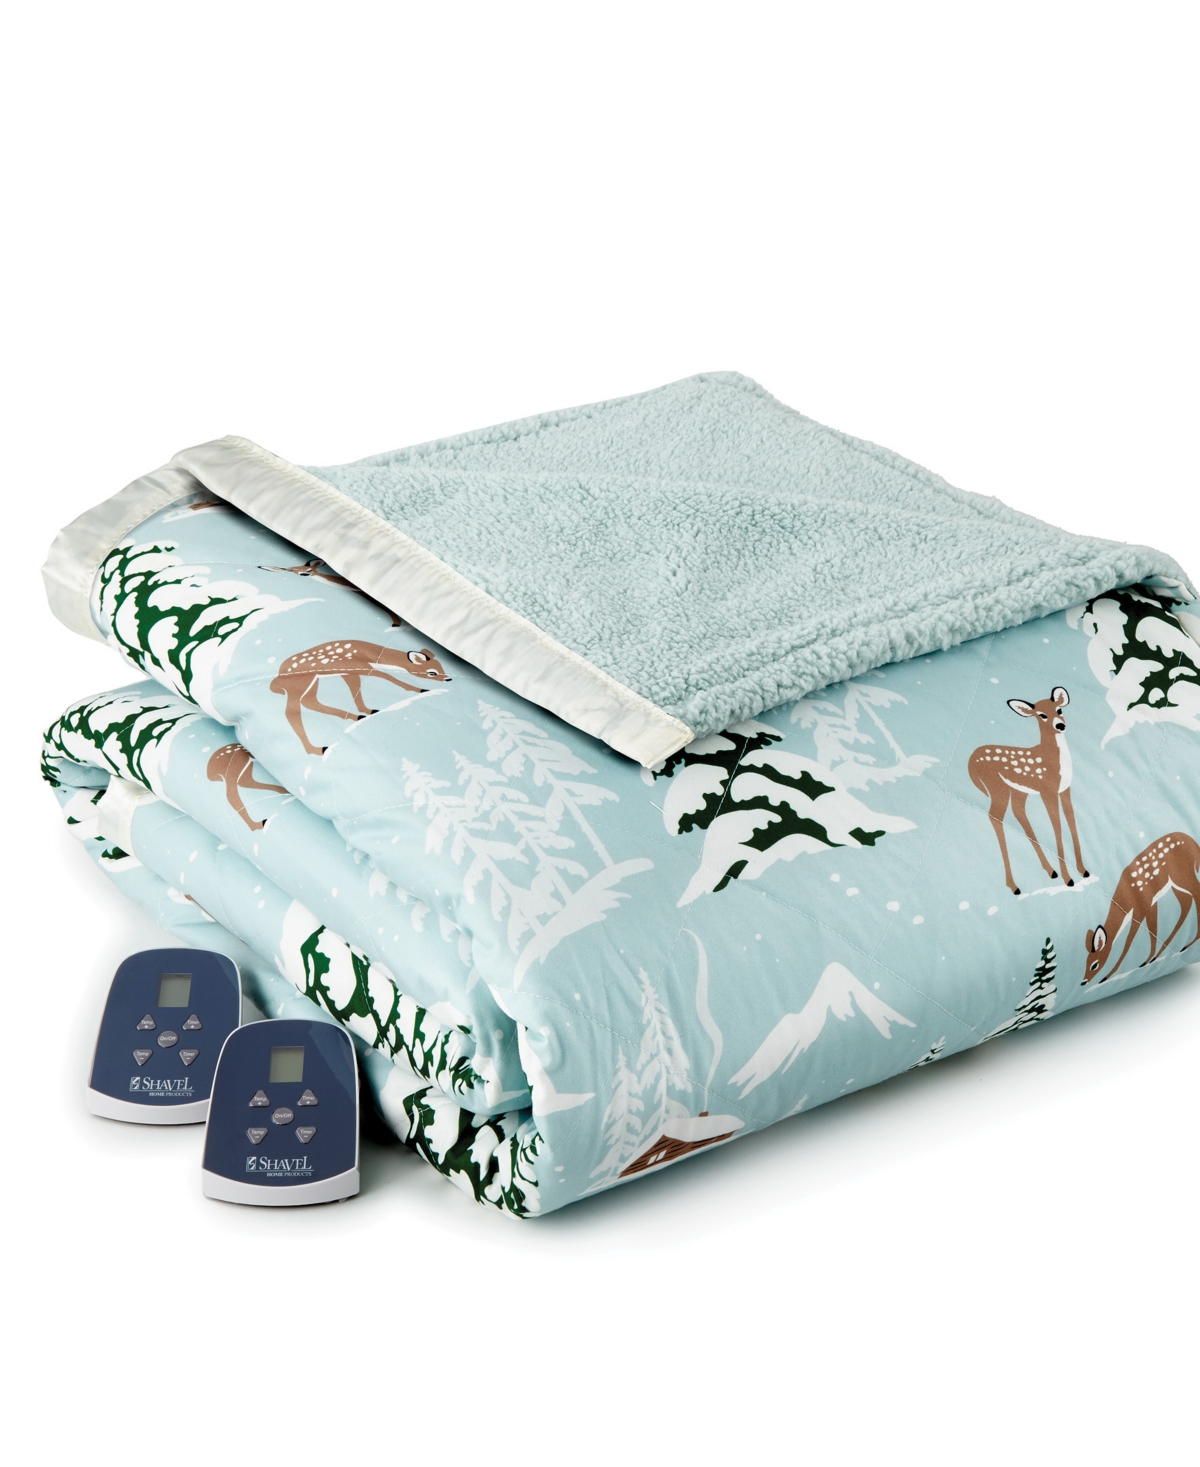 Shavel Reversible Micro Flannel To Sherpa Twin Electric Blanket In Winter Wonderland